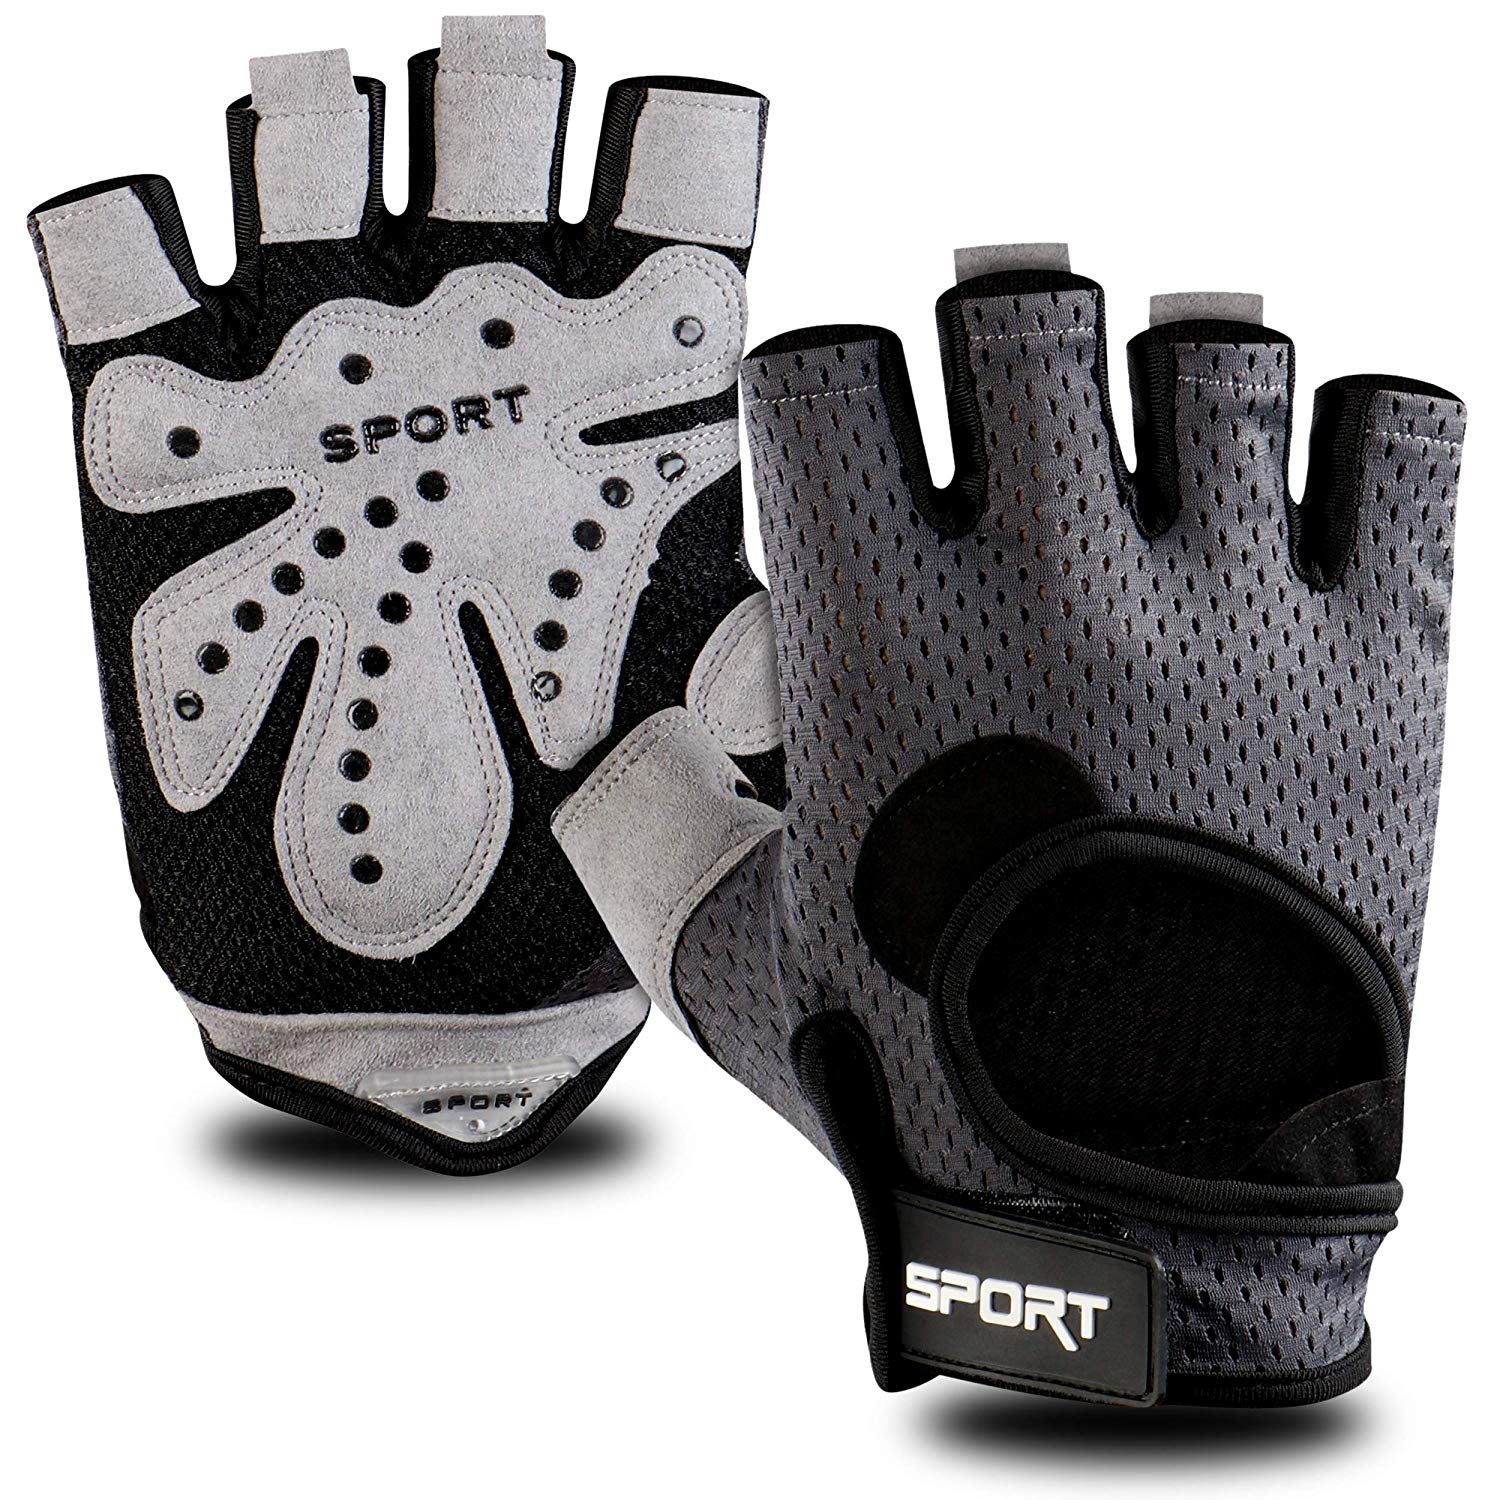 FITSY® Gym Gloves with Padding for Men and Women - Medium